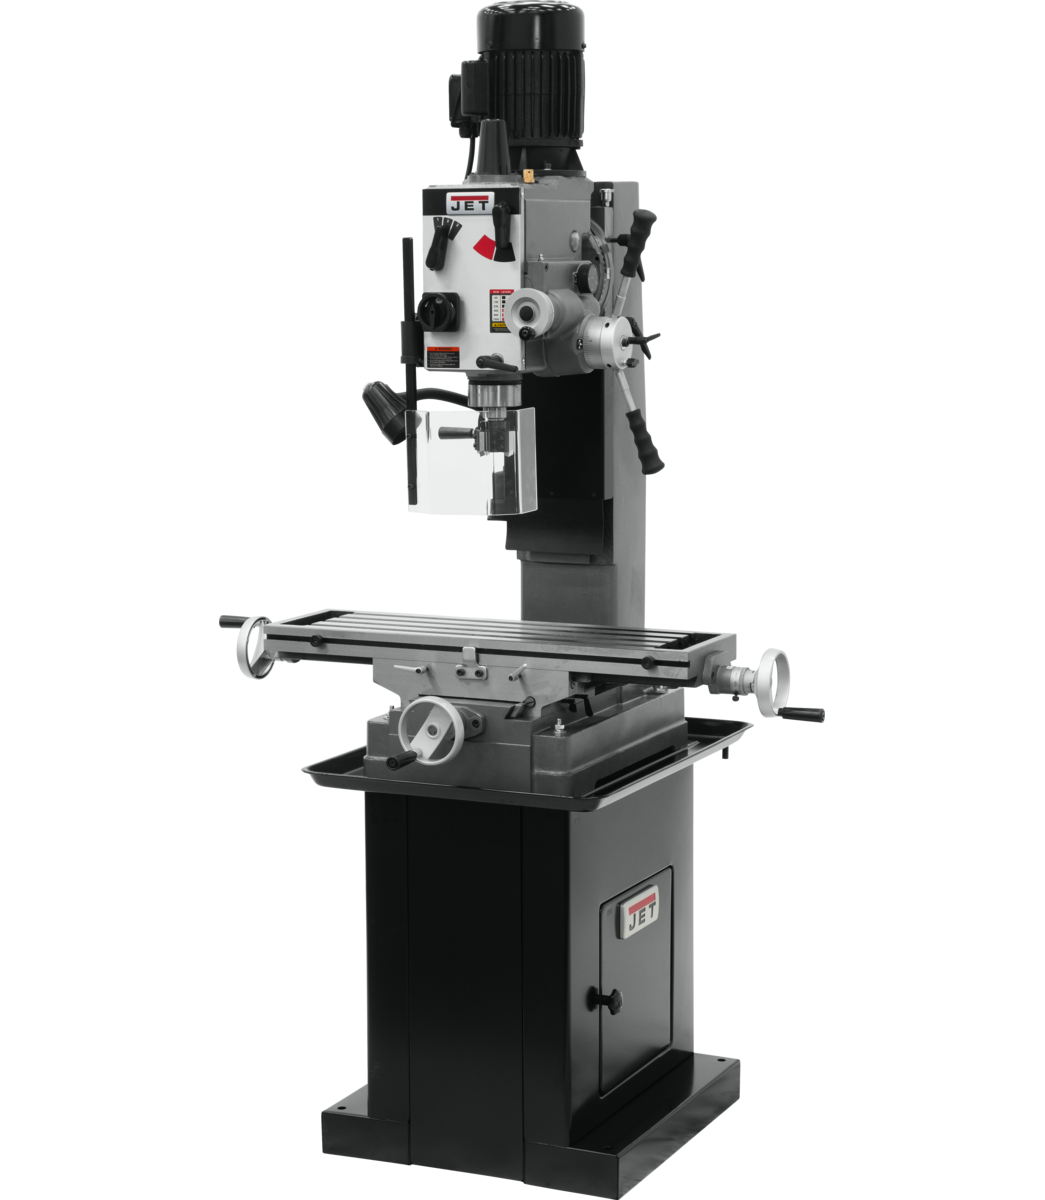 351152, JMD-45GHPF, Geared Head Square Column Mill Drill with Power Downfeed with DP700 2-Axis DRO